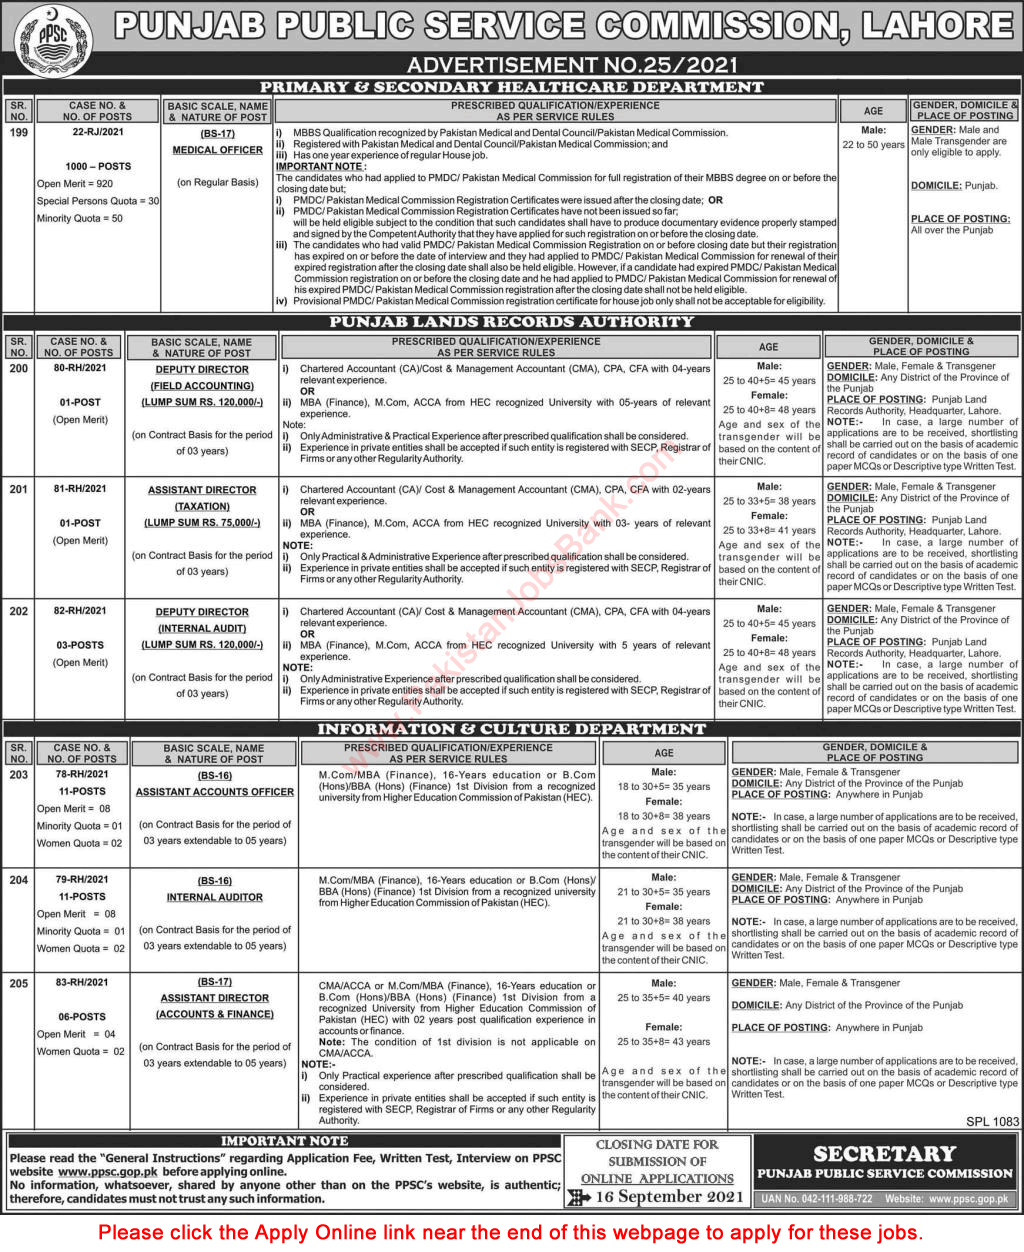 PPSC Jobs September 2021 Apply Online Consolidated Advertisement No 25/2021 Latest